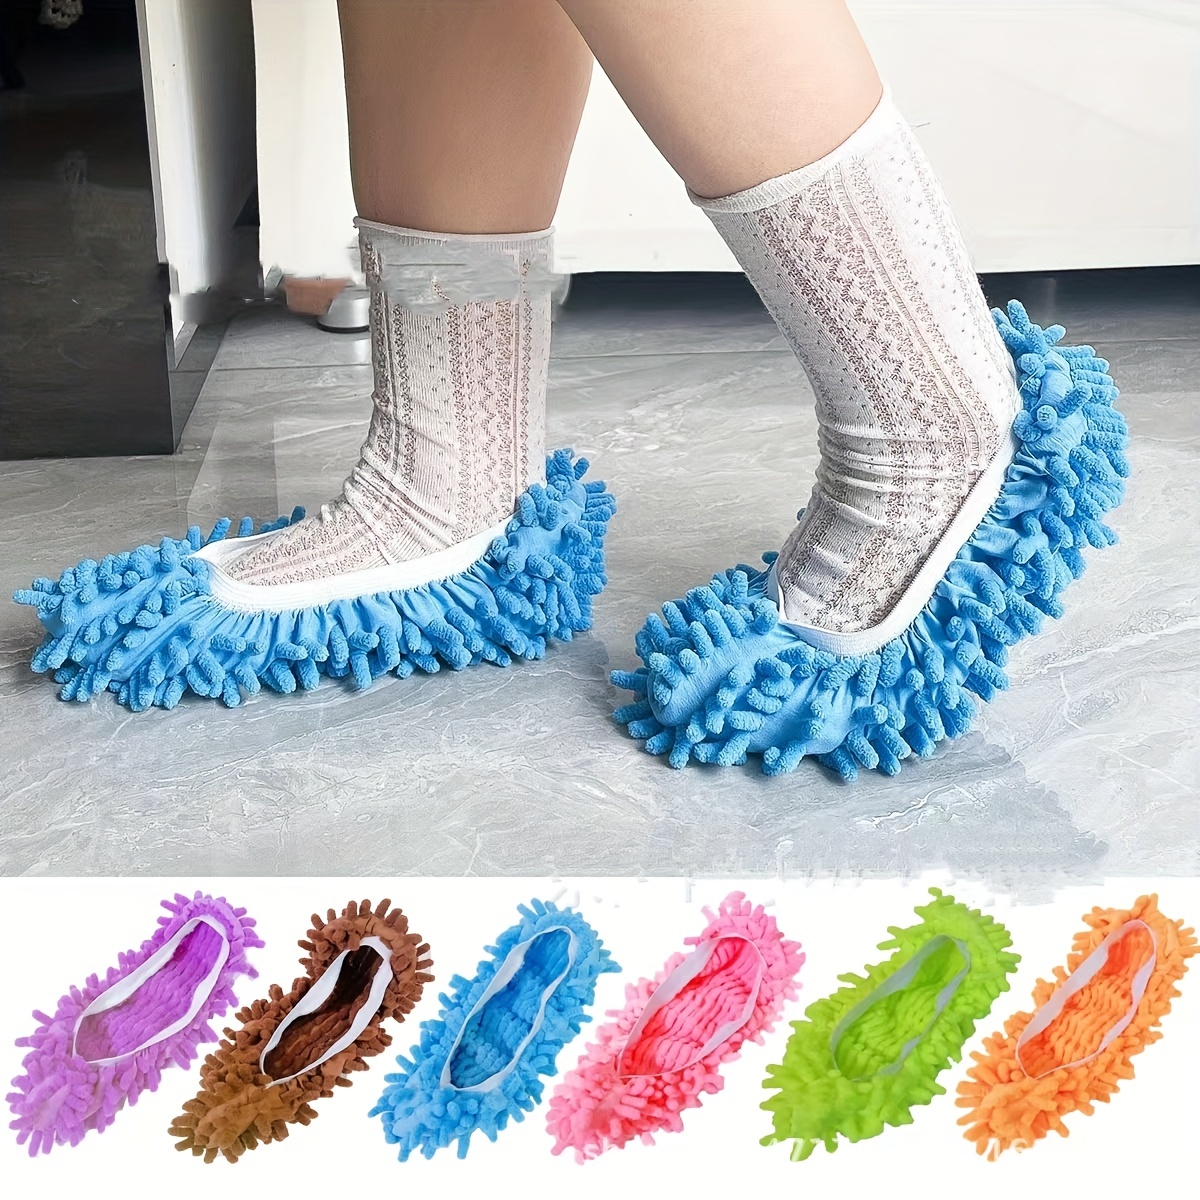 

2pcs Thickened, Removable & Washable Shoe Covers - Keep Your Wooden Floors Clean, Silent & Warm!